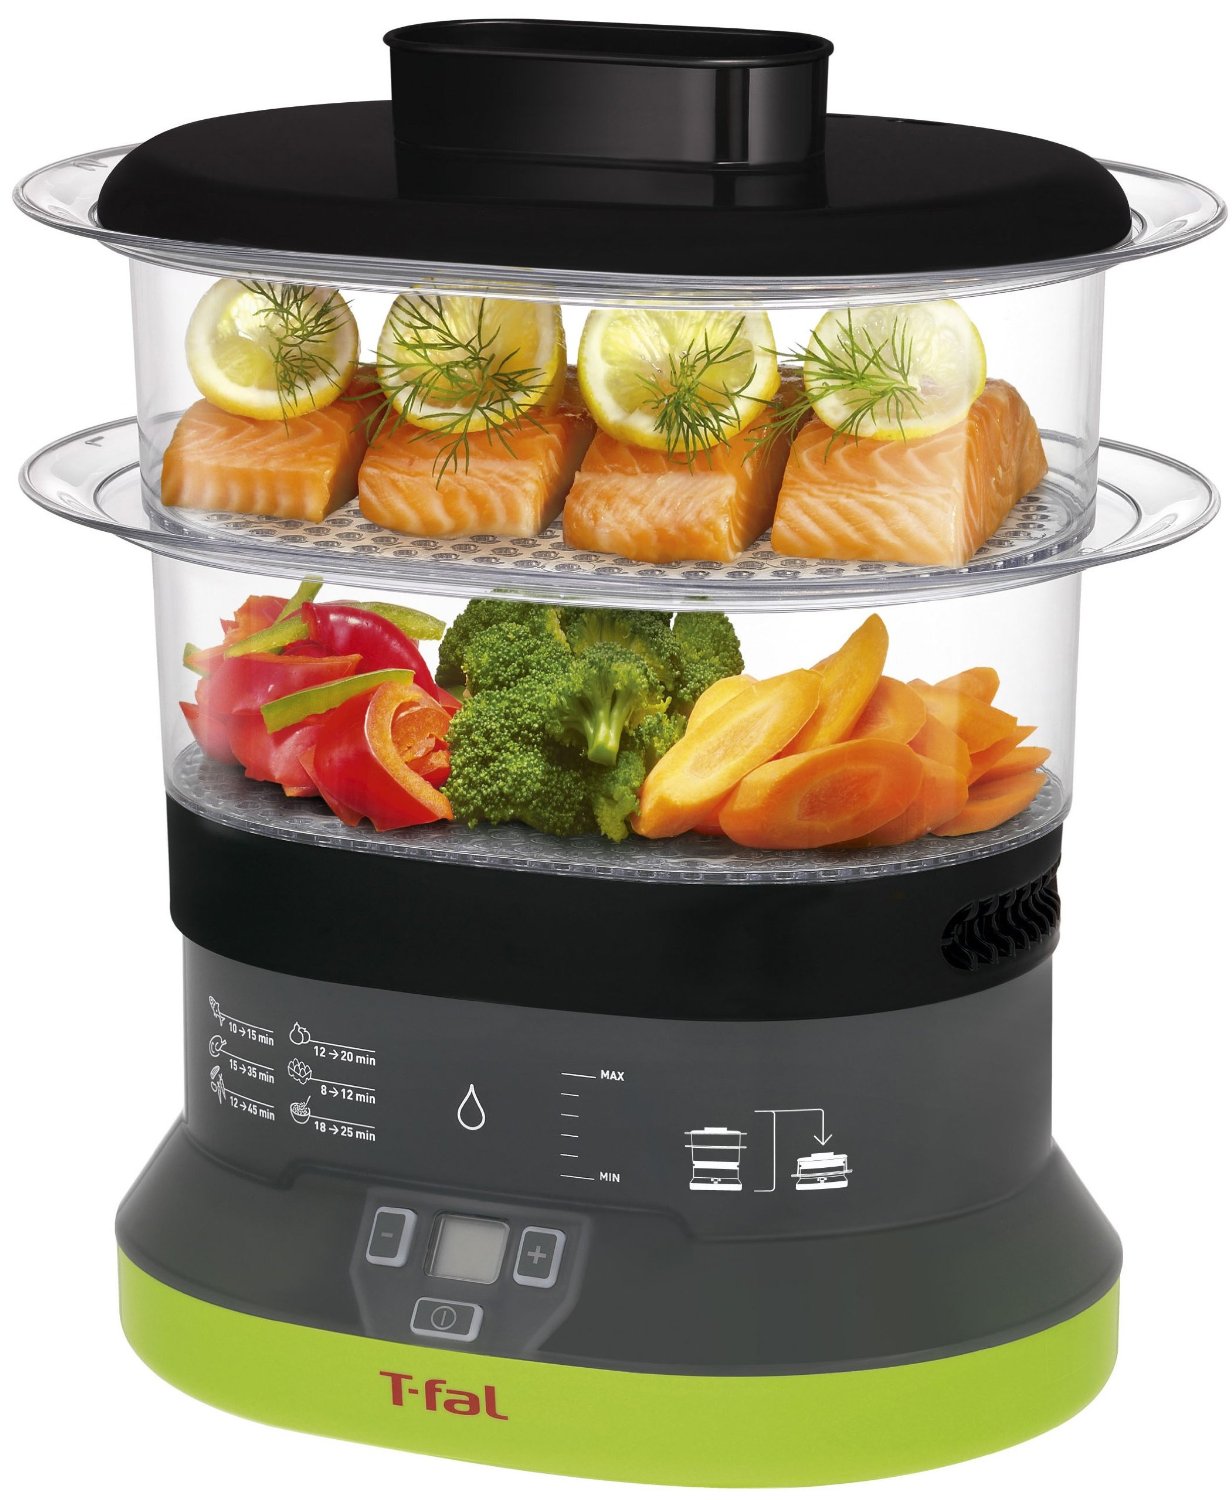 T-fal-2-Tier-Electric-Plastic-Food-Steamer-Small-Balanced-Living-Compact.jpg